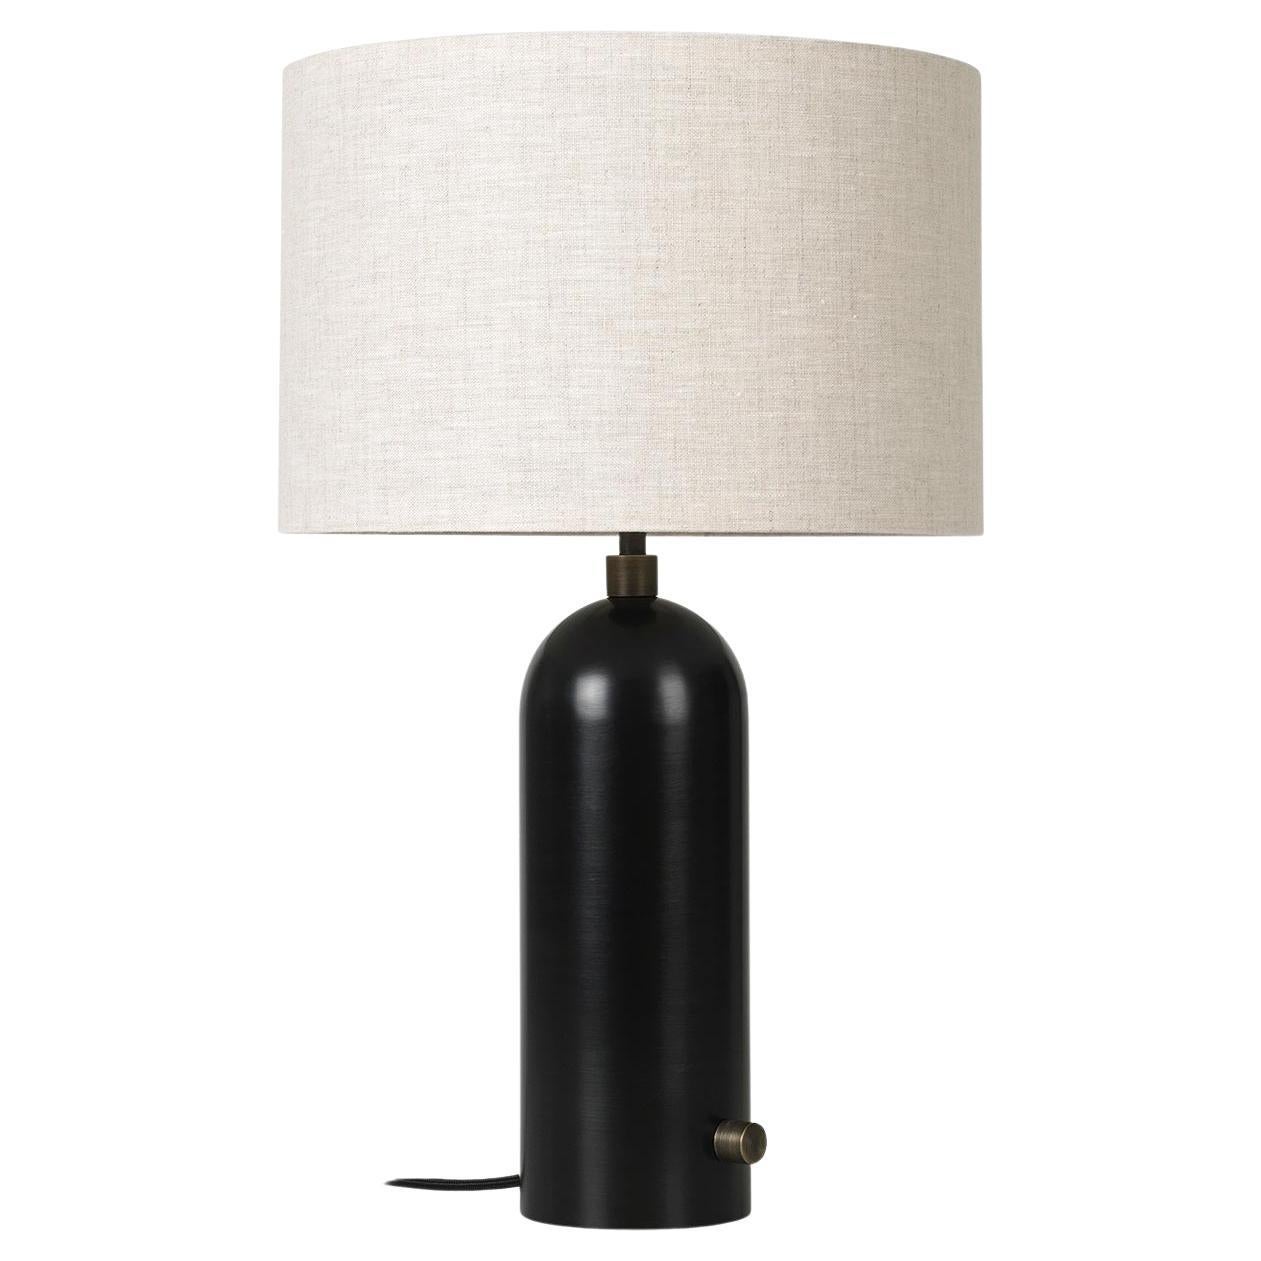 Gravity Table Lamp - Small, Blackened Steel, Canvas For Sale